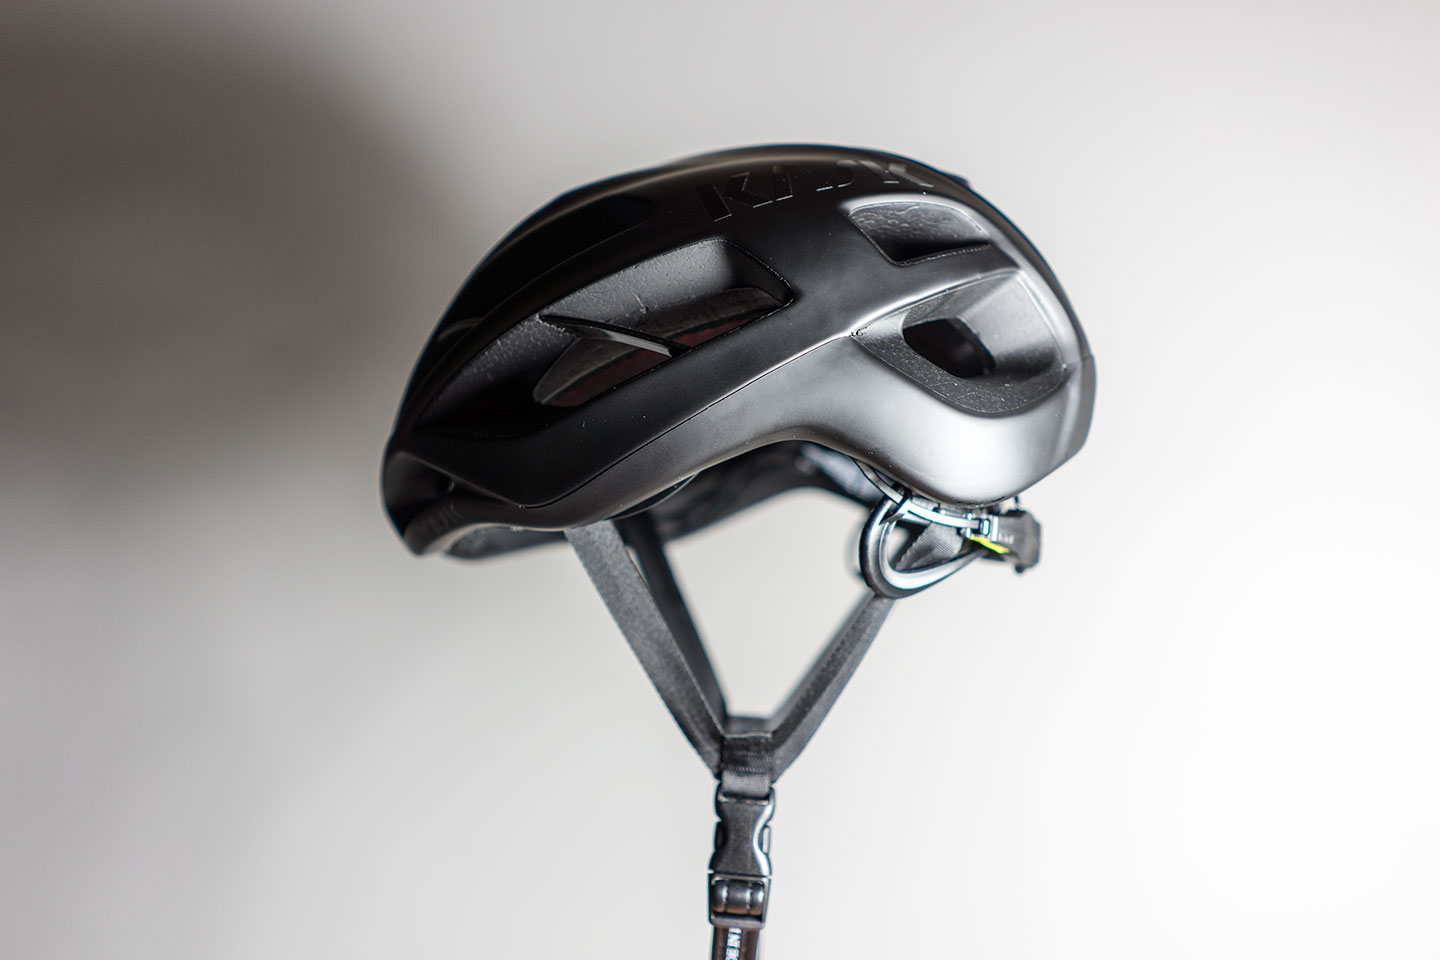 Kask Protone side view